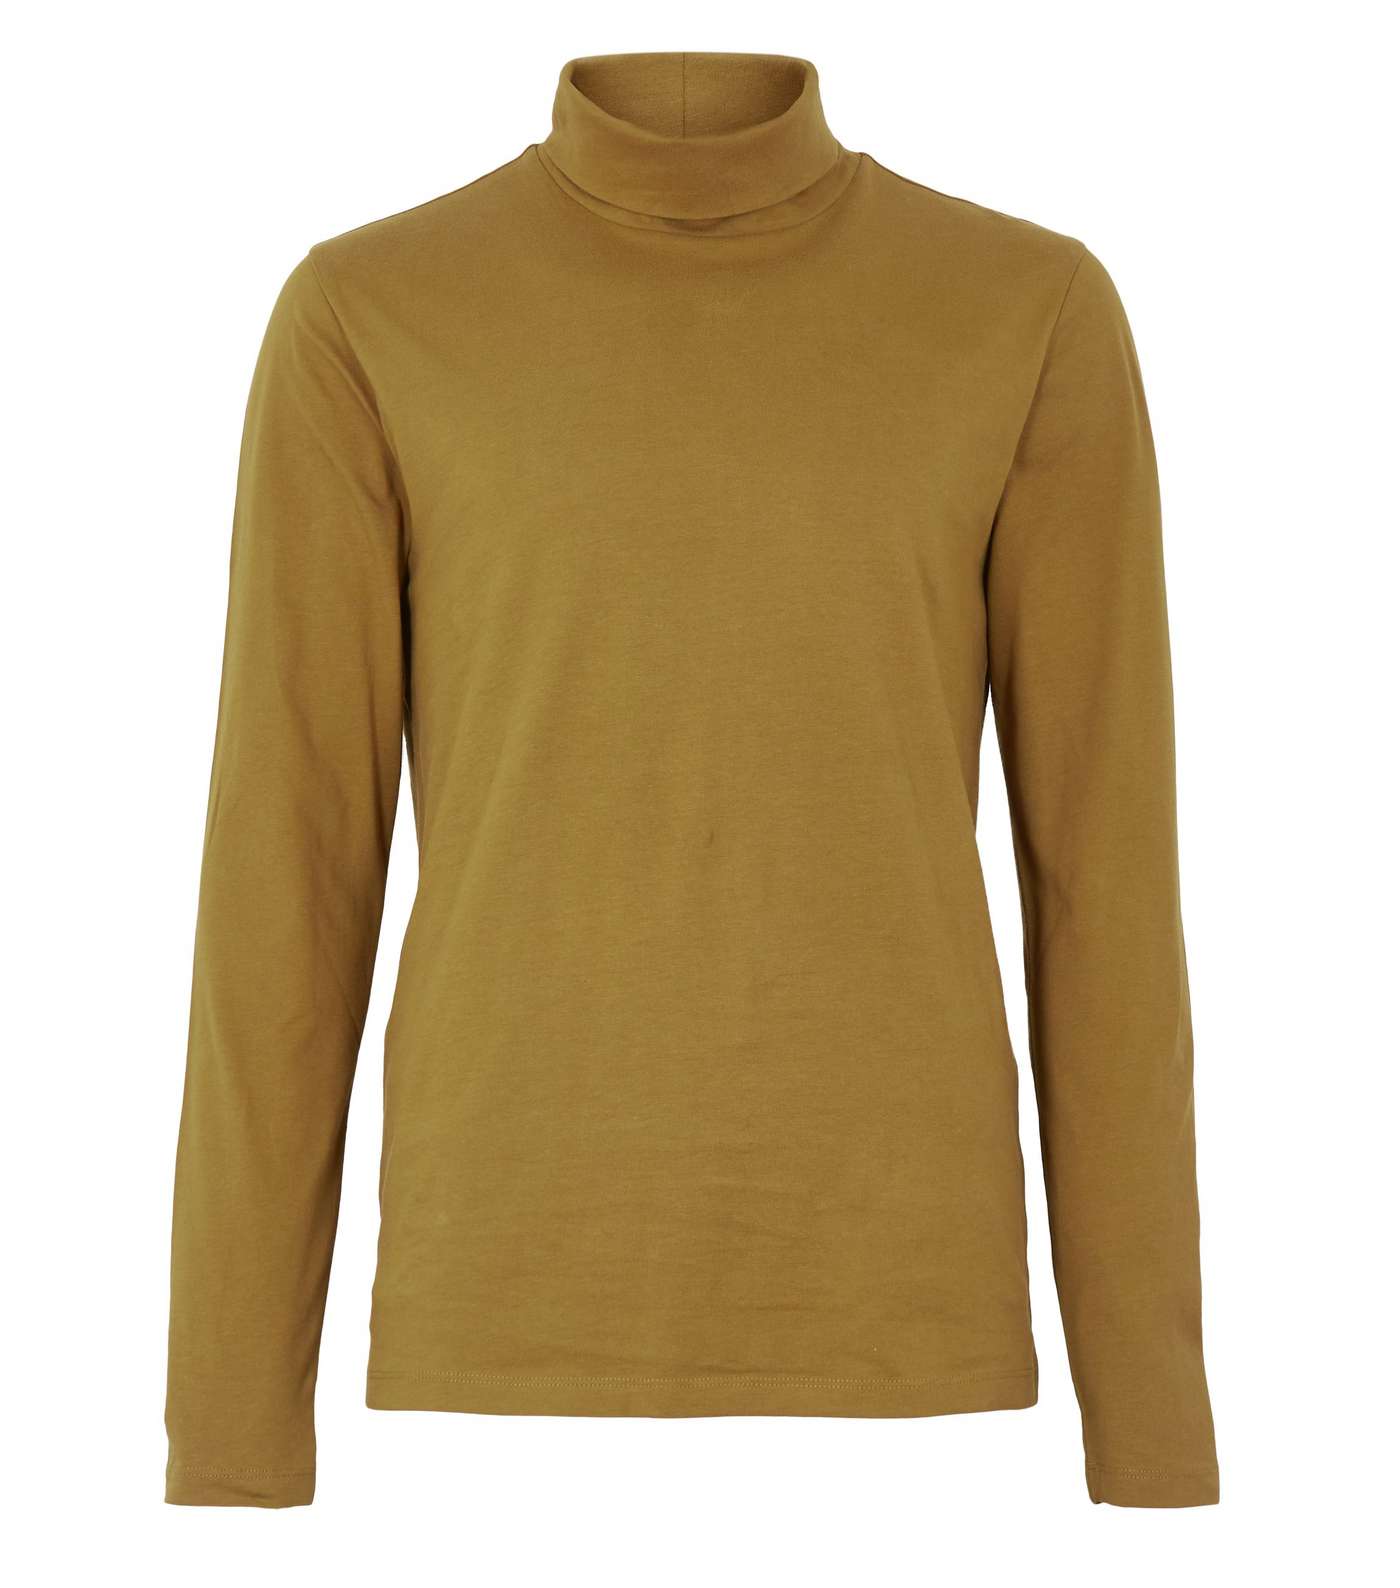 Tan Roll Neck Long Sleeve Top Image 5